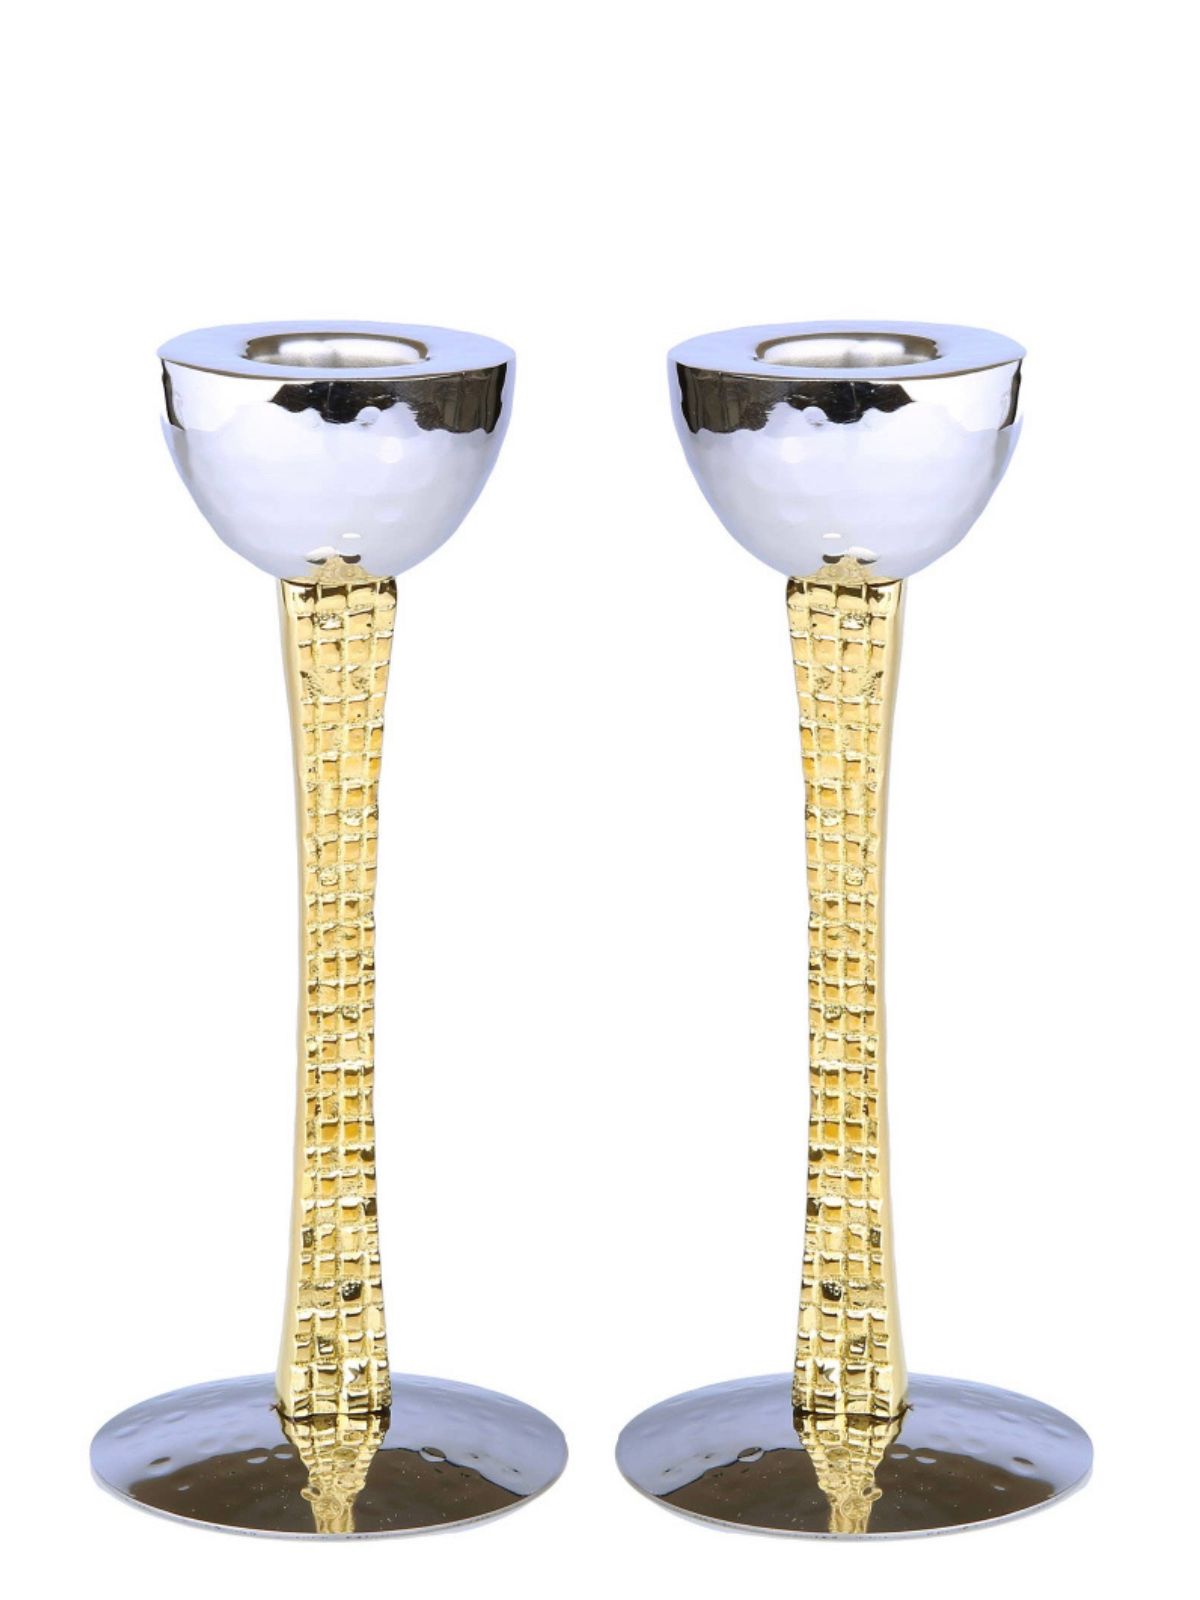 Set of 2 6H Stainless Steel Silver Candle Holders with Gold Mosaic Designed Stems - KYA Home Decor.